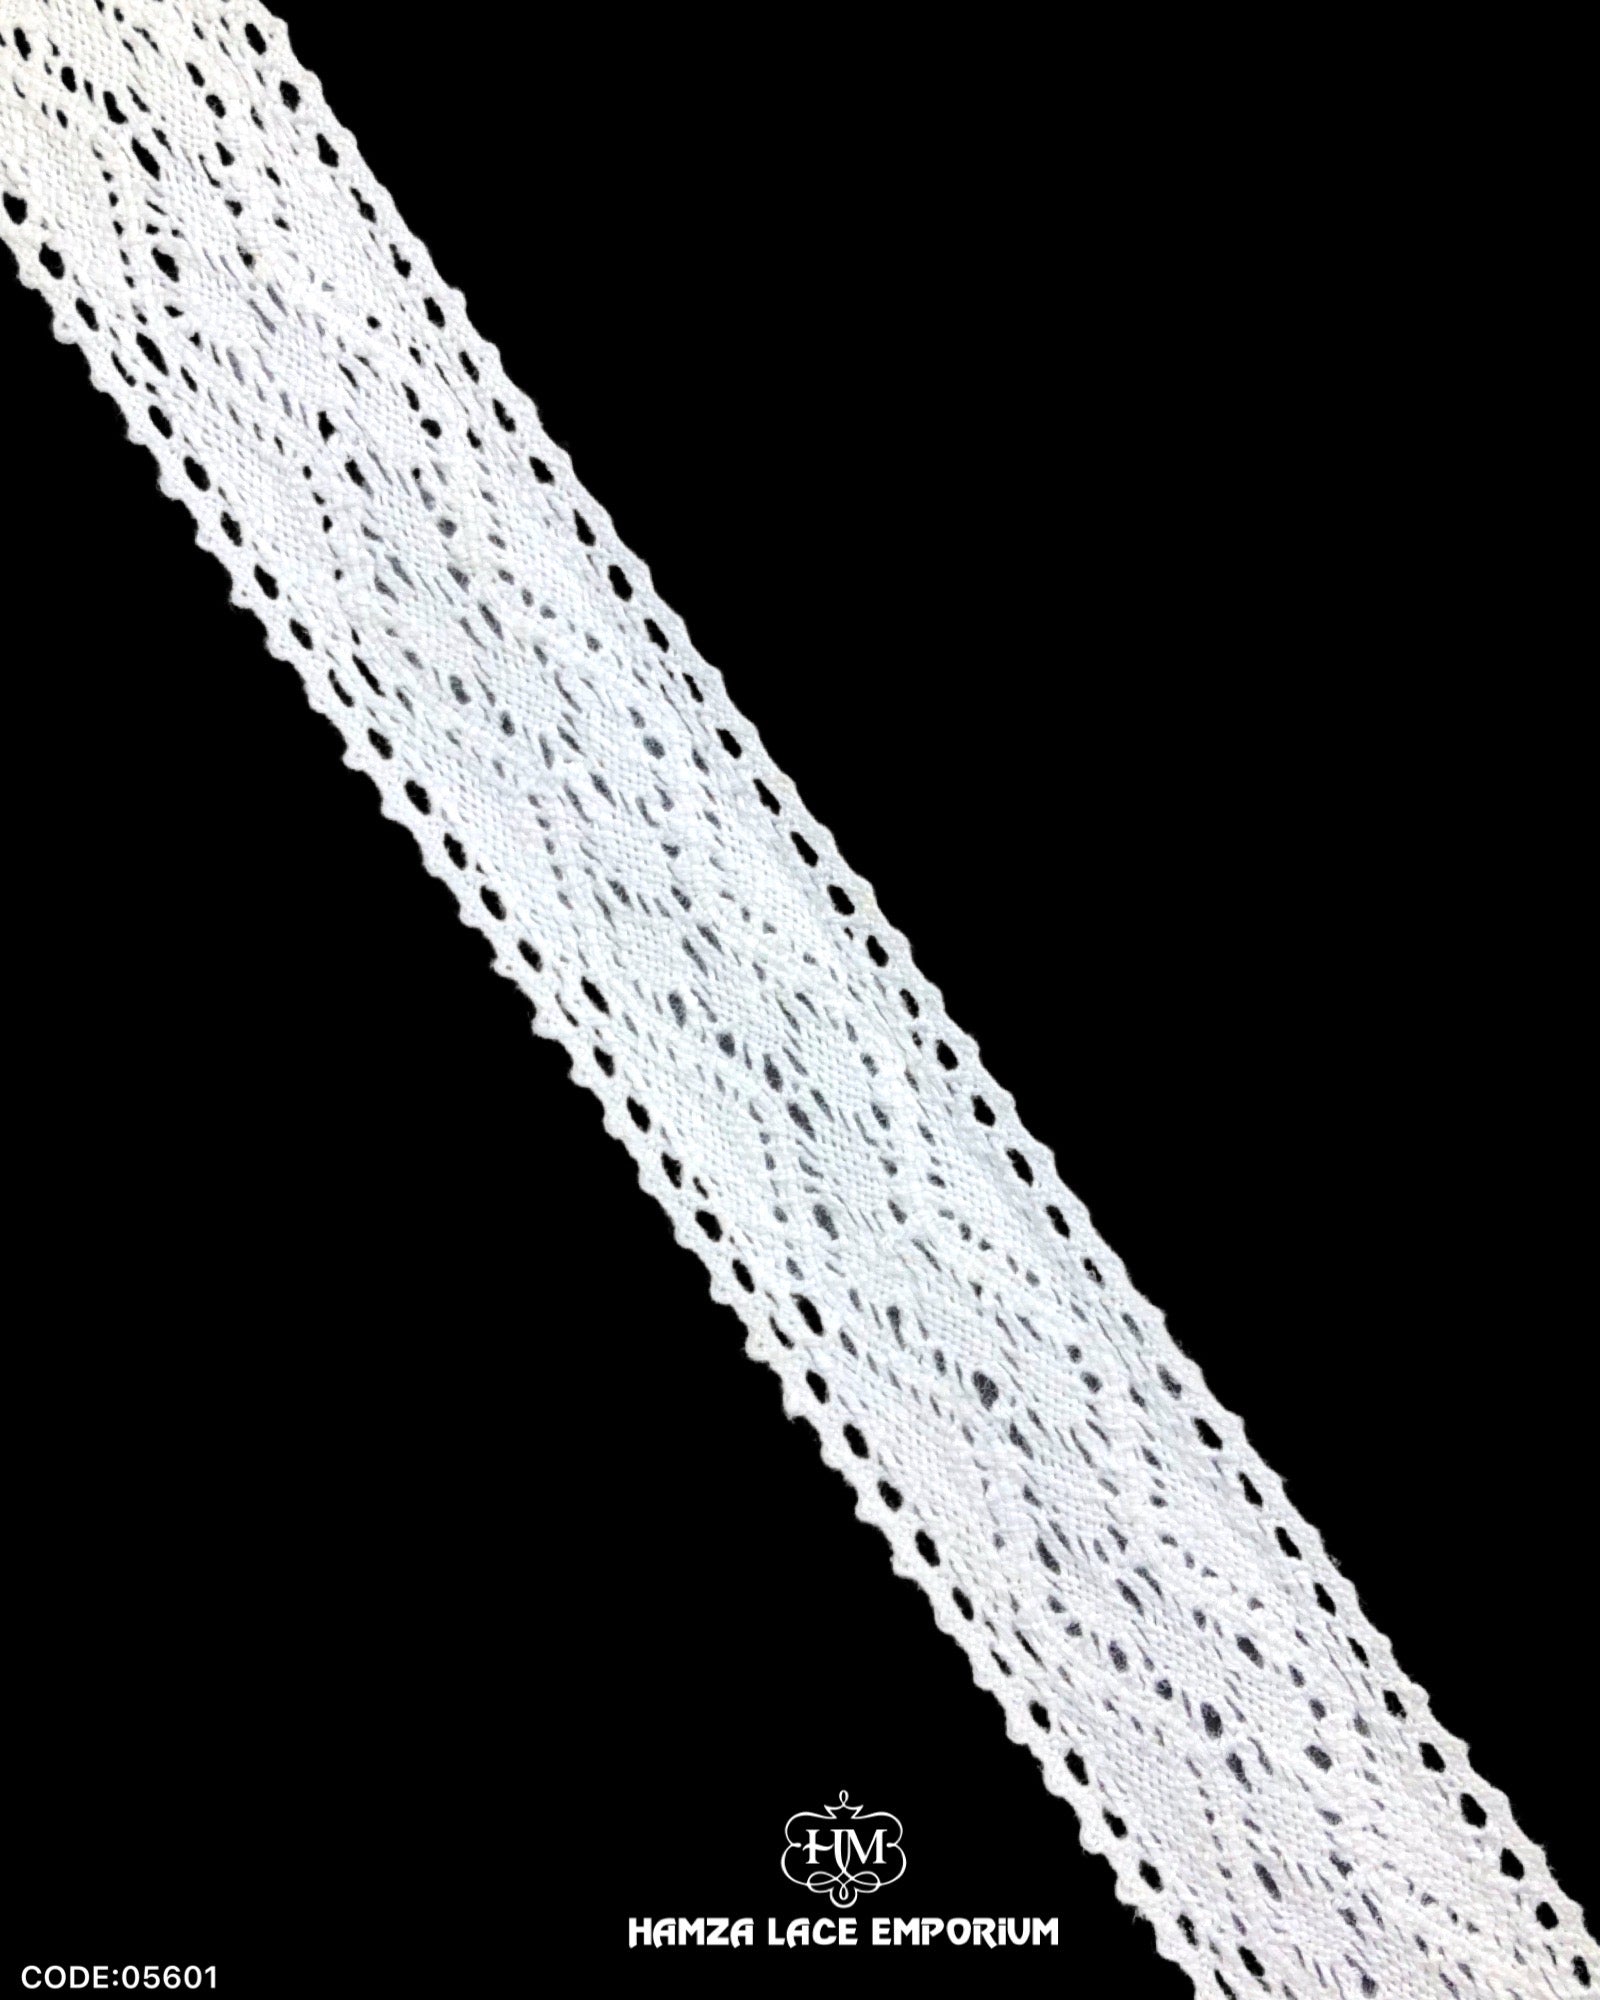 'Center Filling Crochet Lace 05601' with the 'Hamza Lace' sign